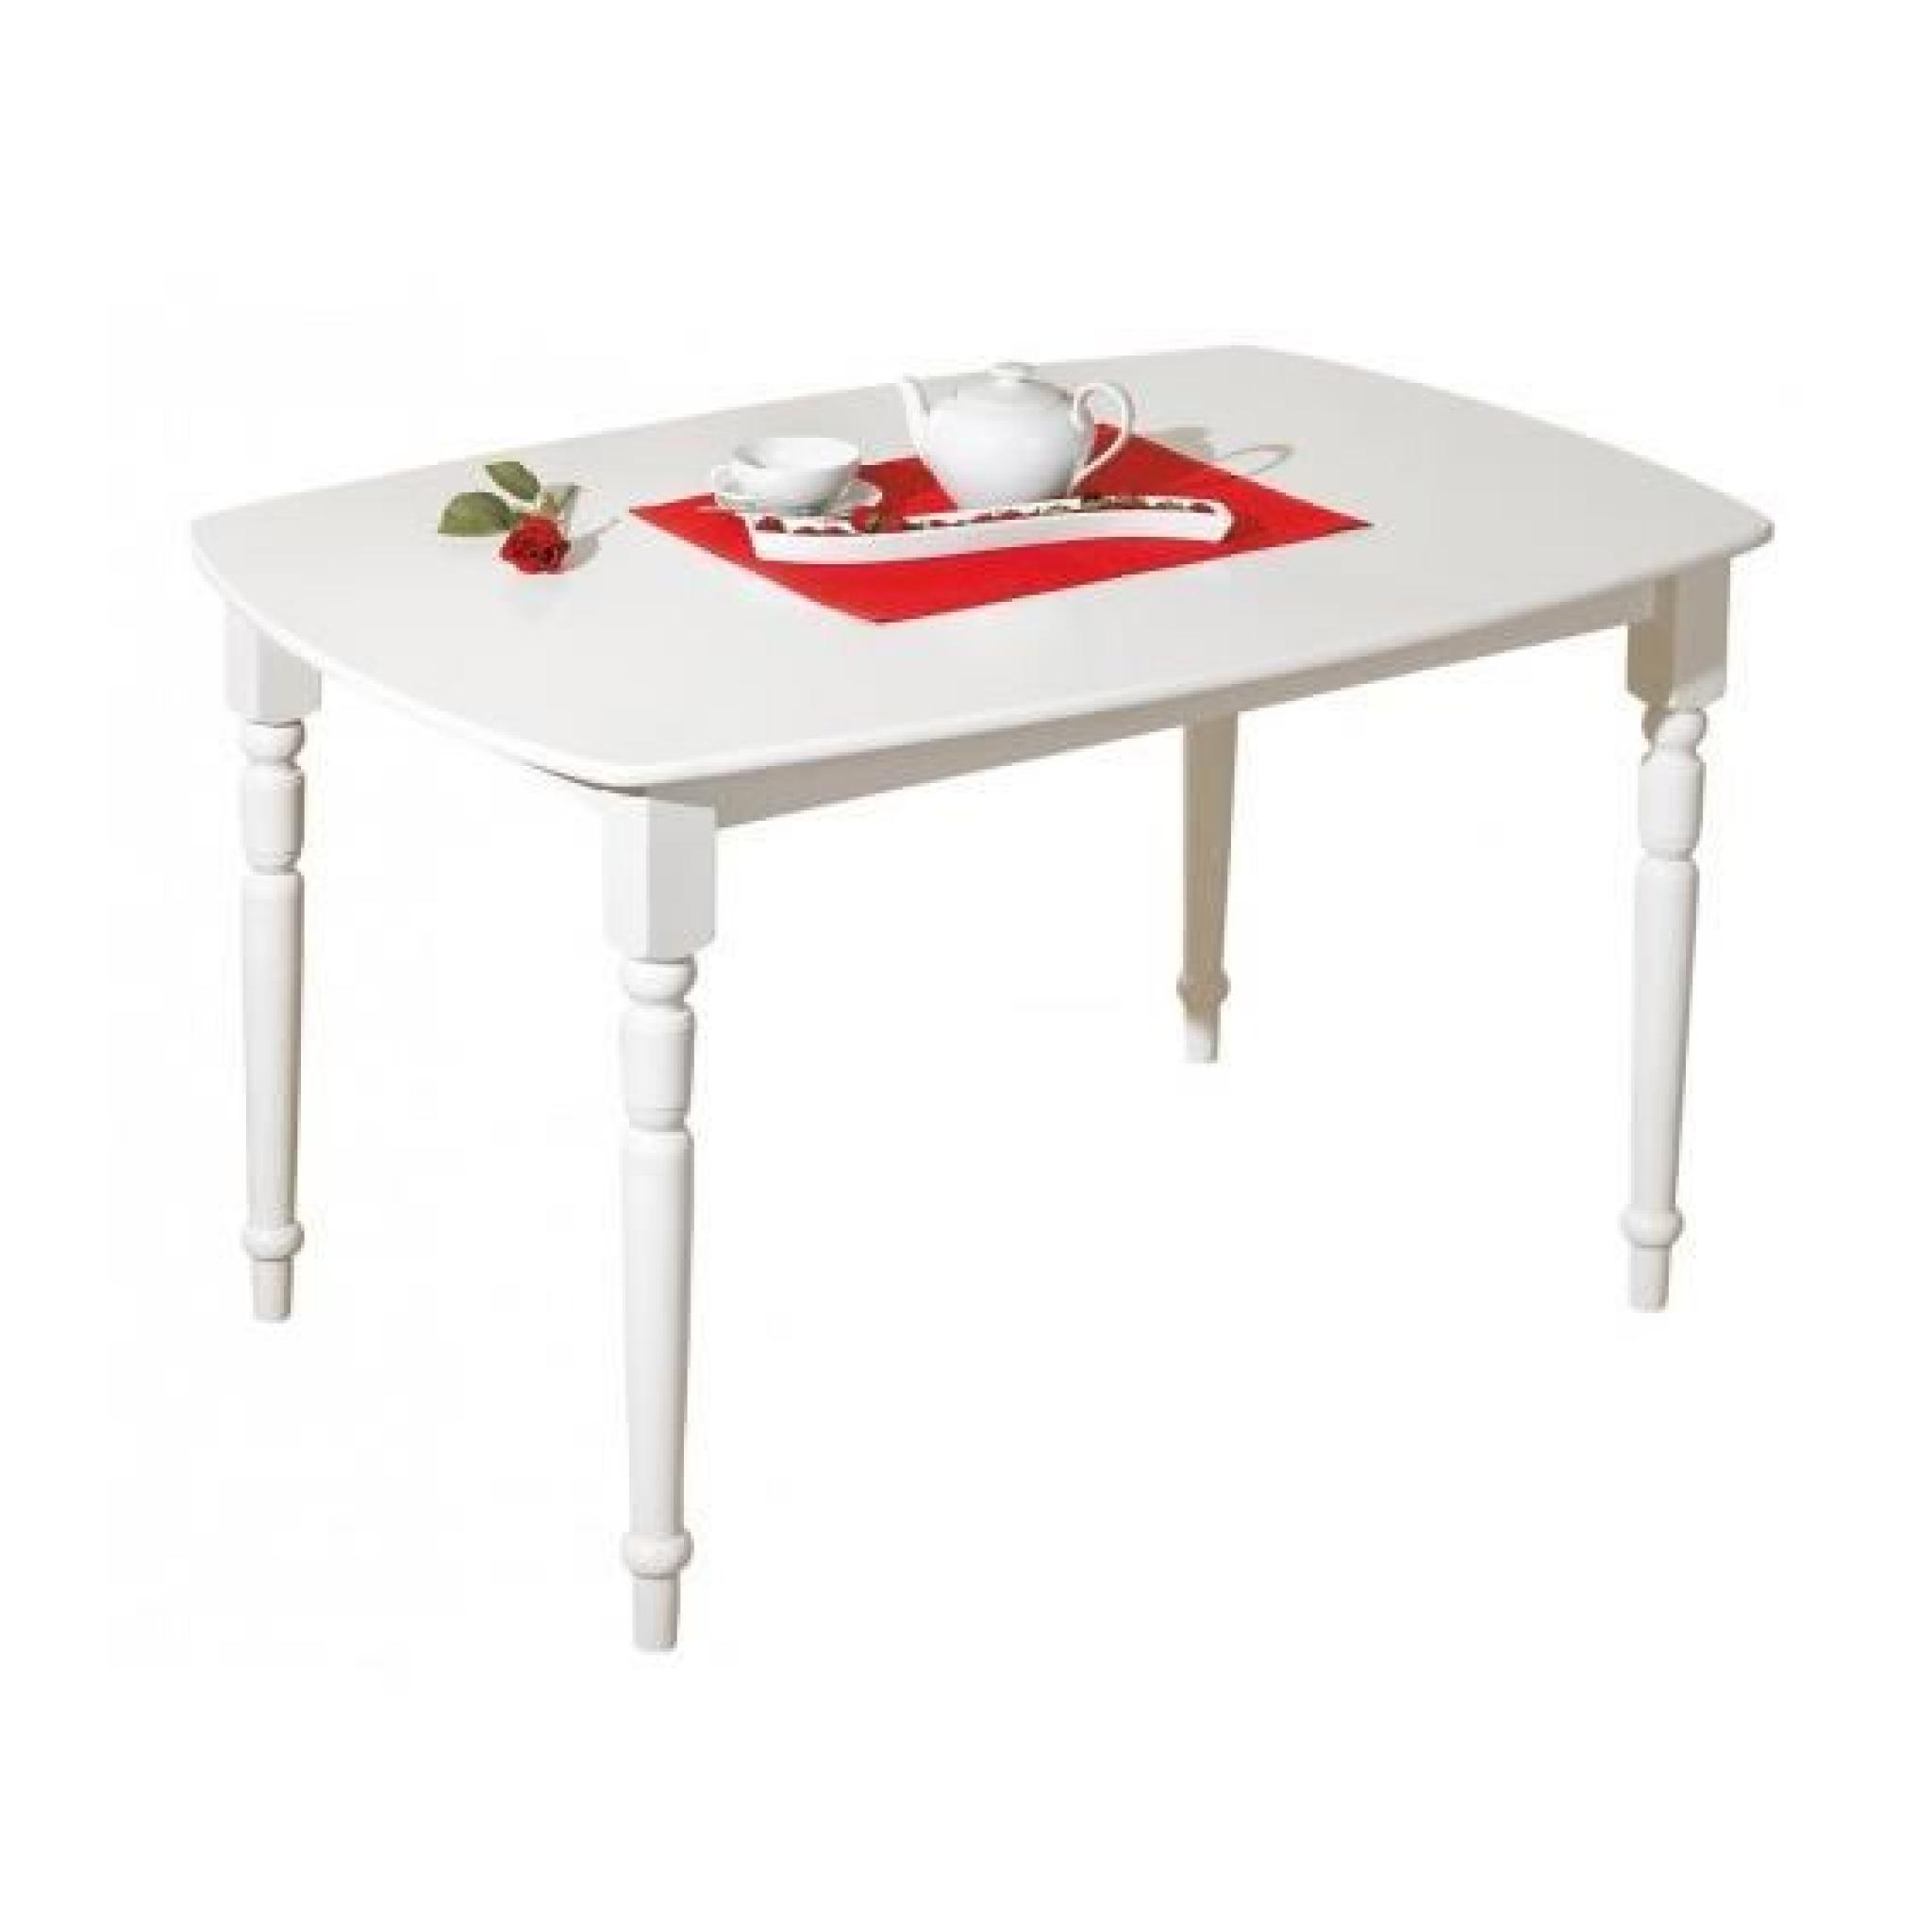 Sonia - Table rectangulaire